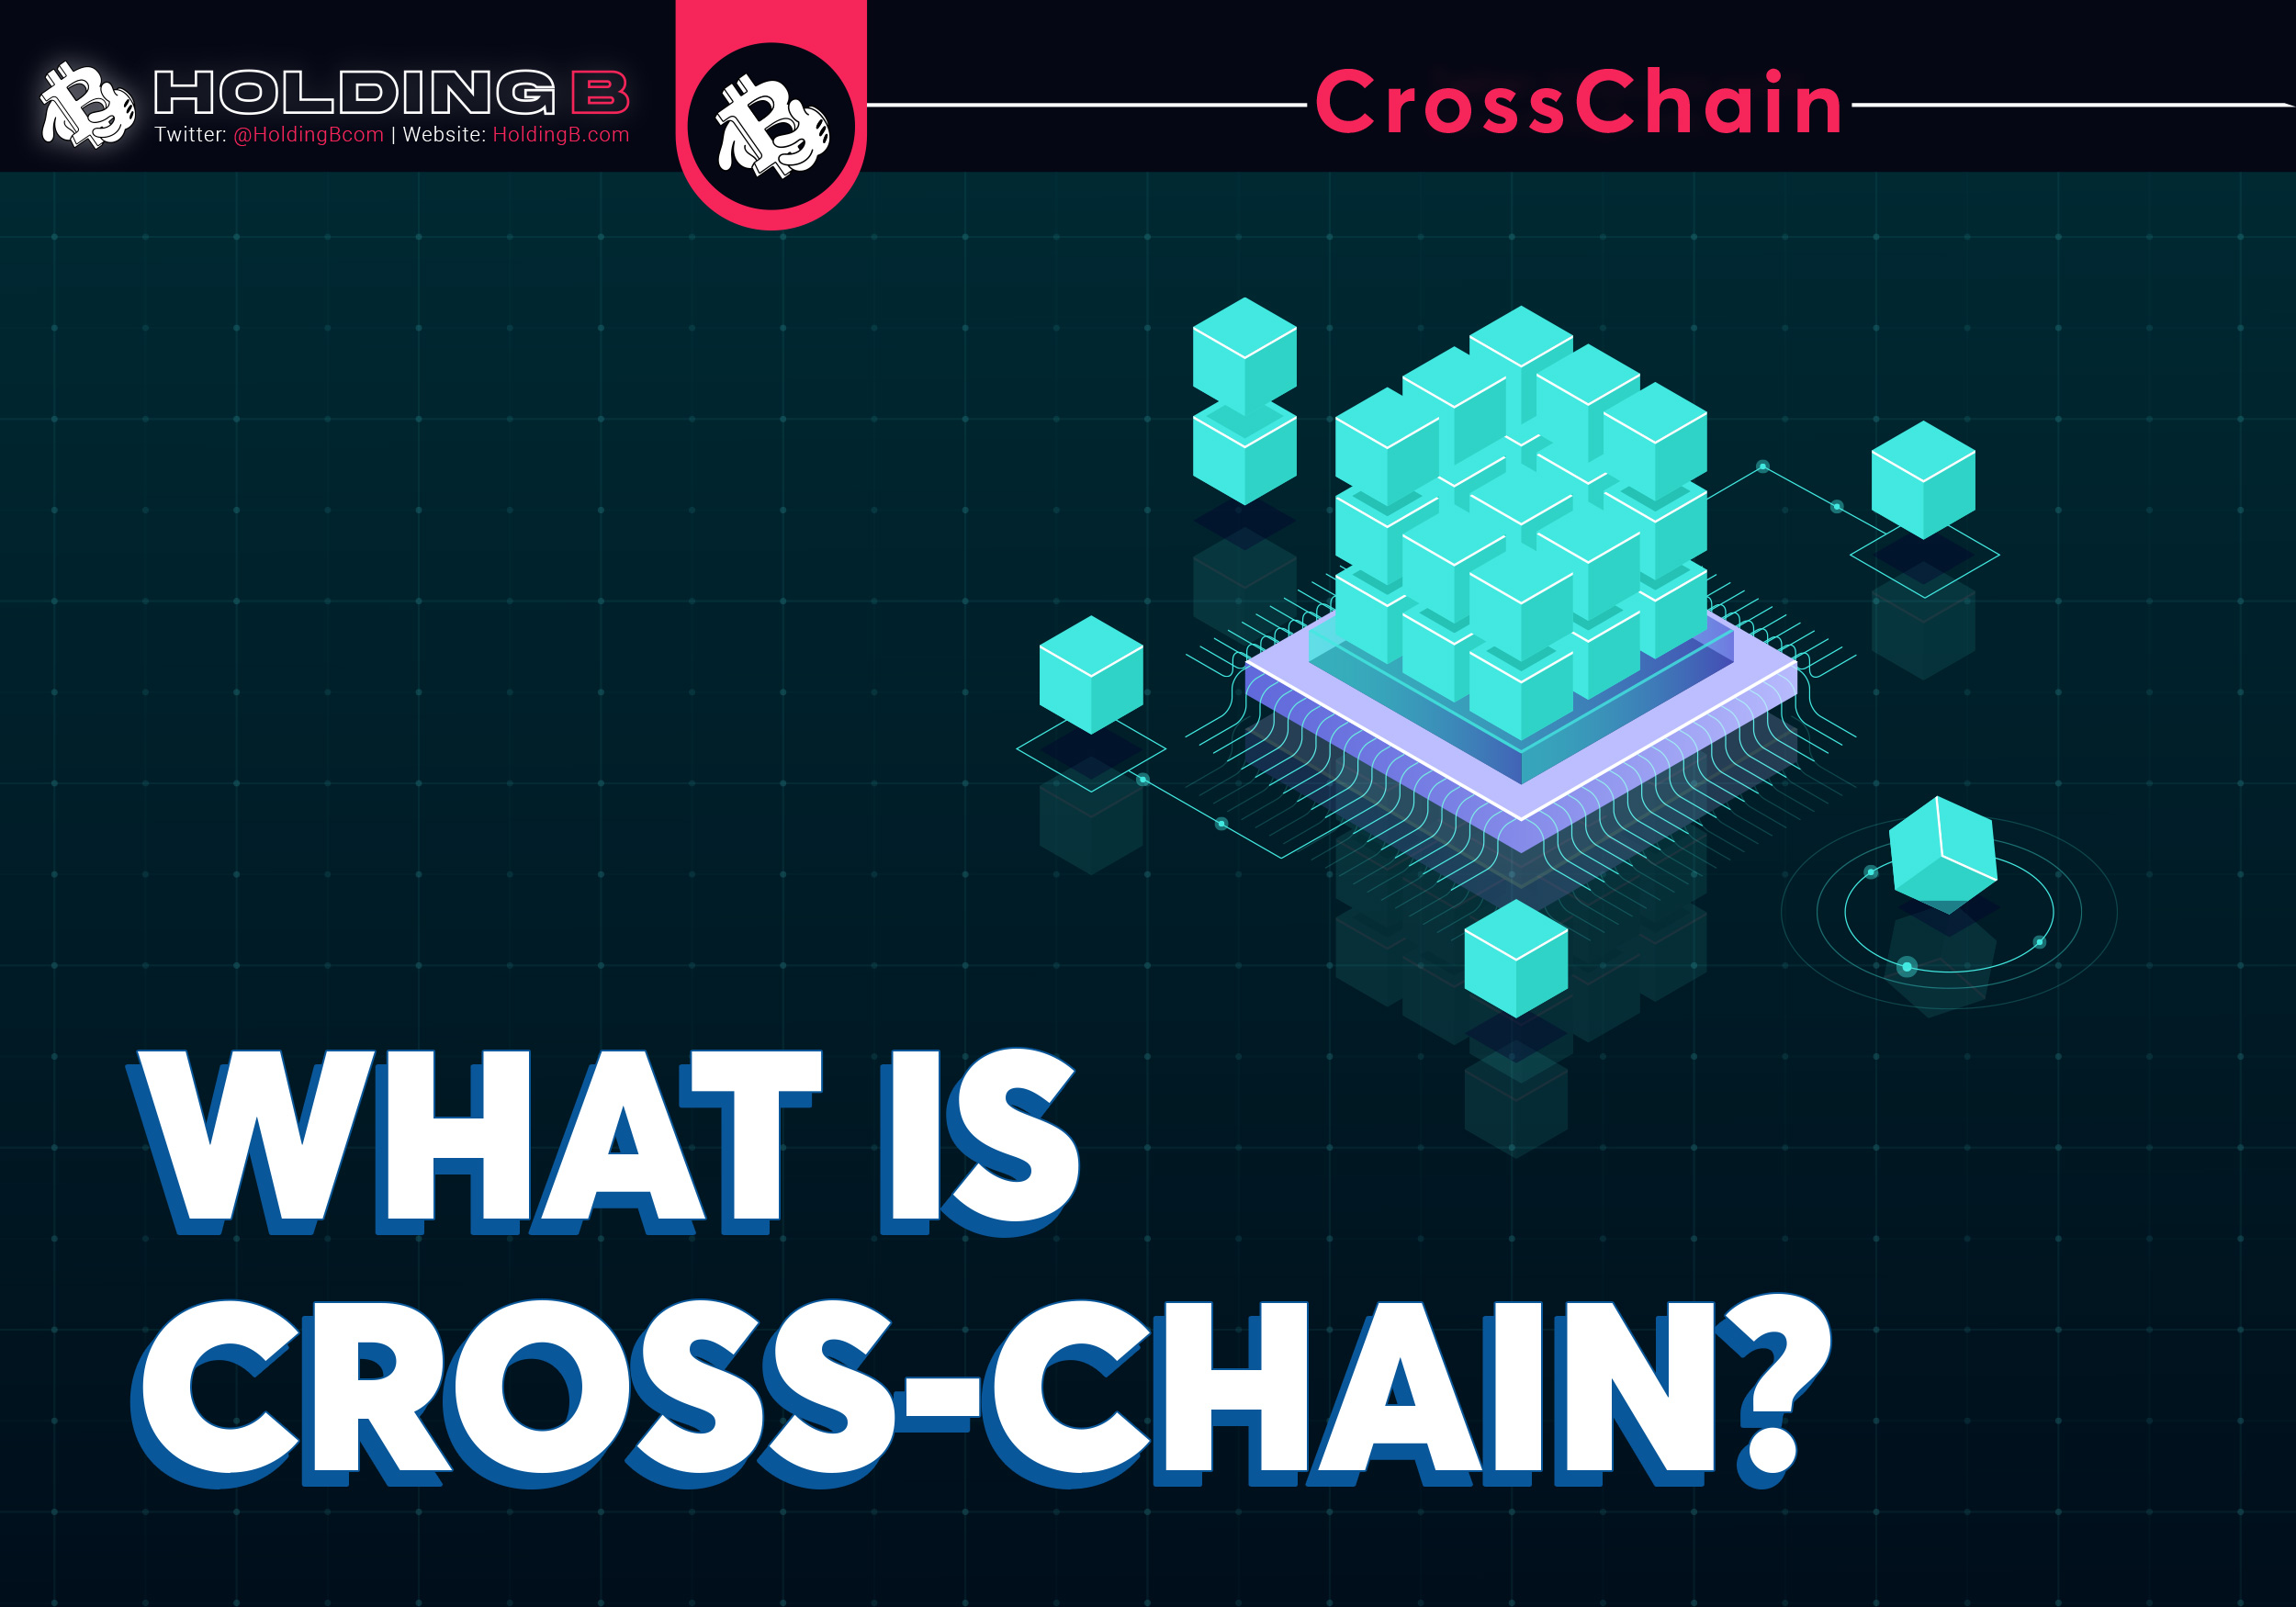 WHAT IS CROSS-CHAIN?